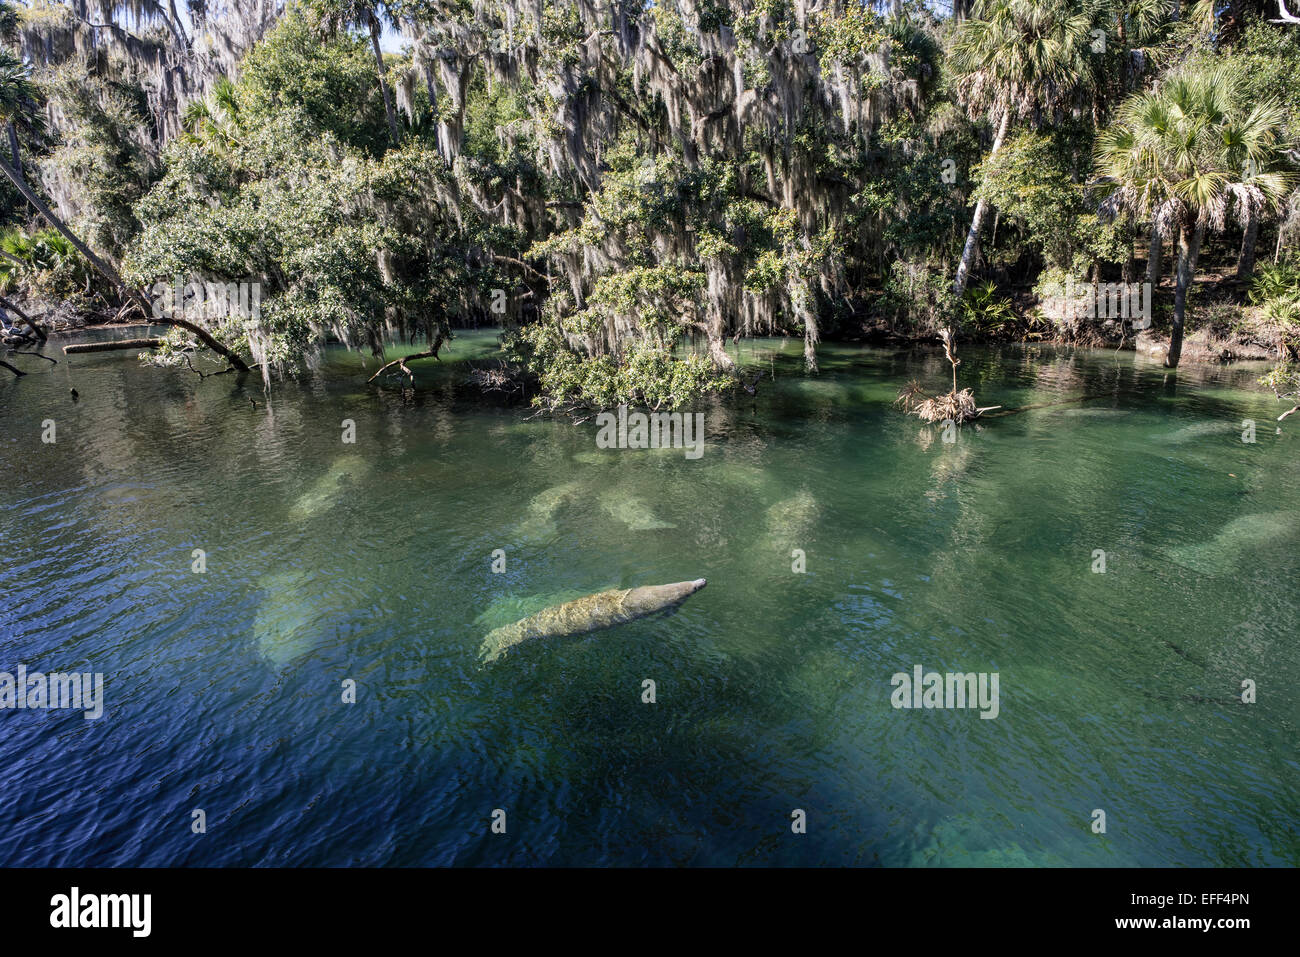 Wintering wild West Indian Manatee herd warming themselves in the warm clear waters of the Blue Springs State Park, FL. One is surfacing to breath. Stock Photo